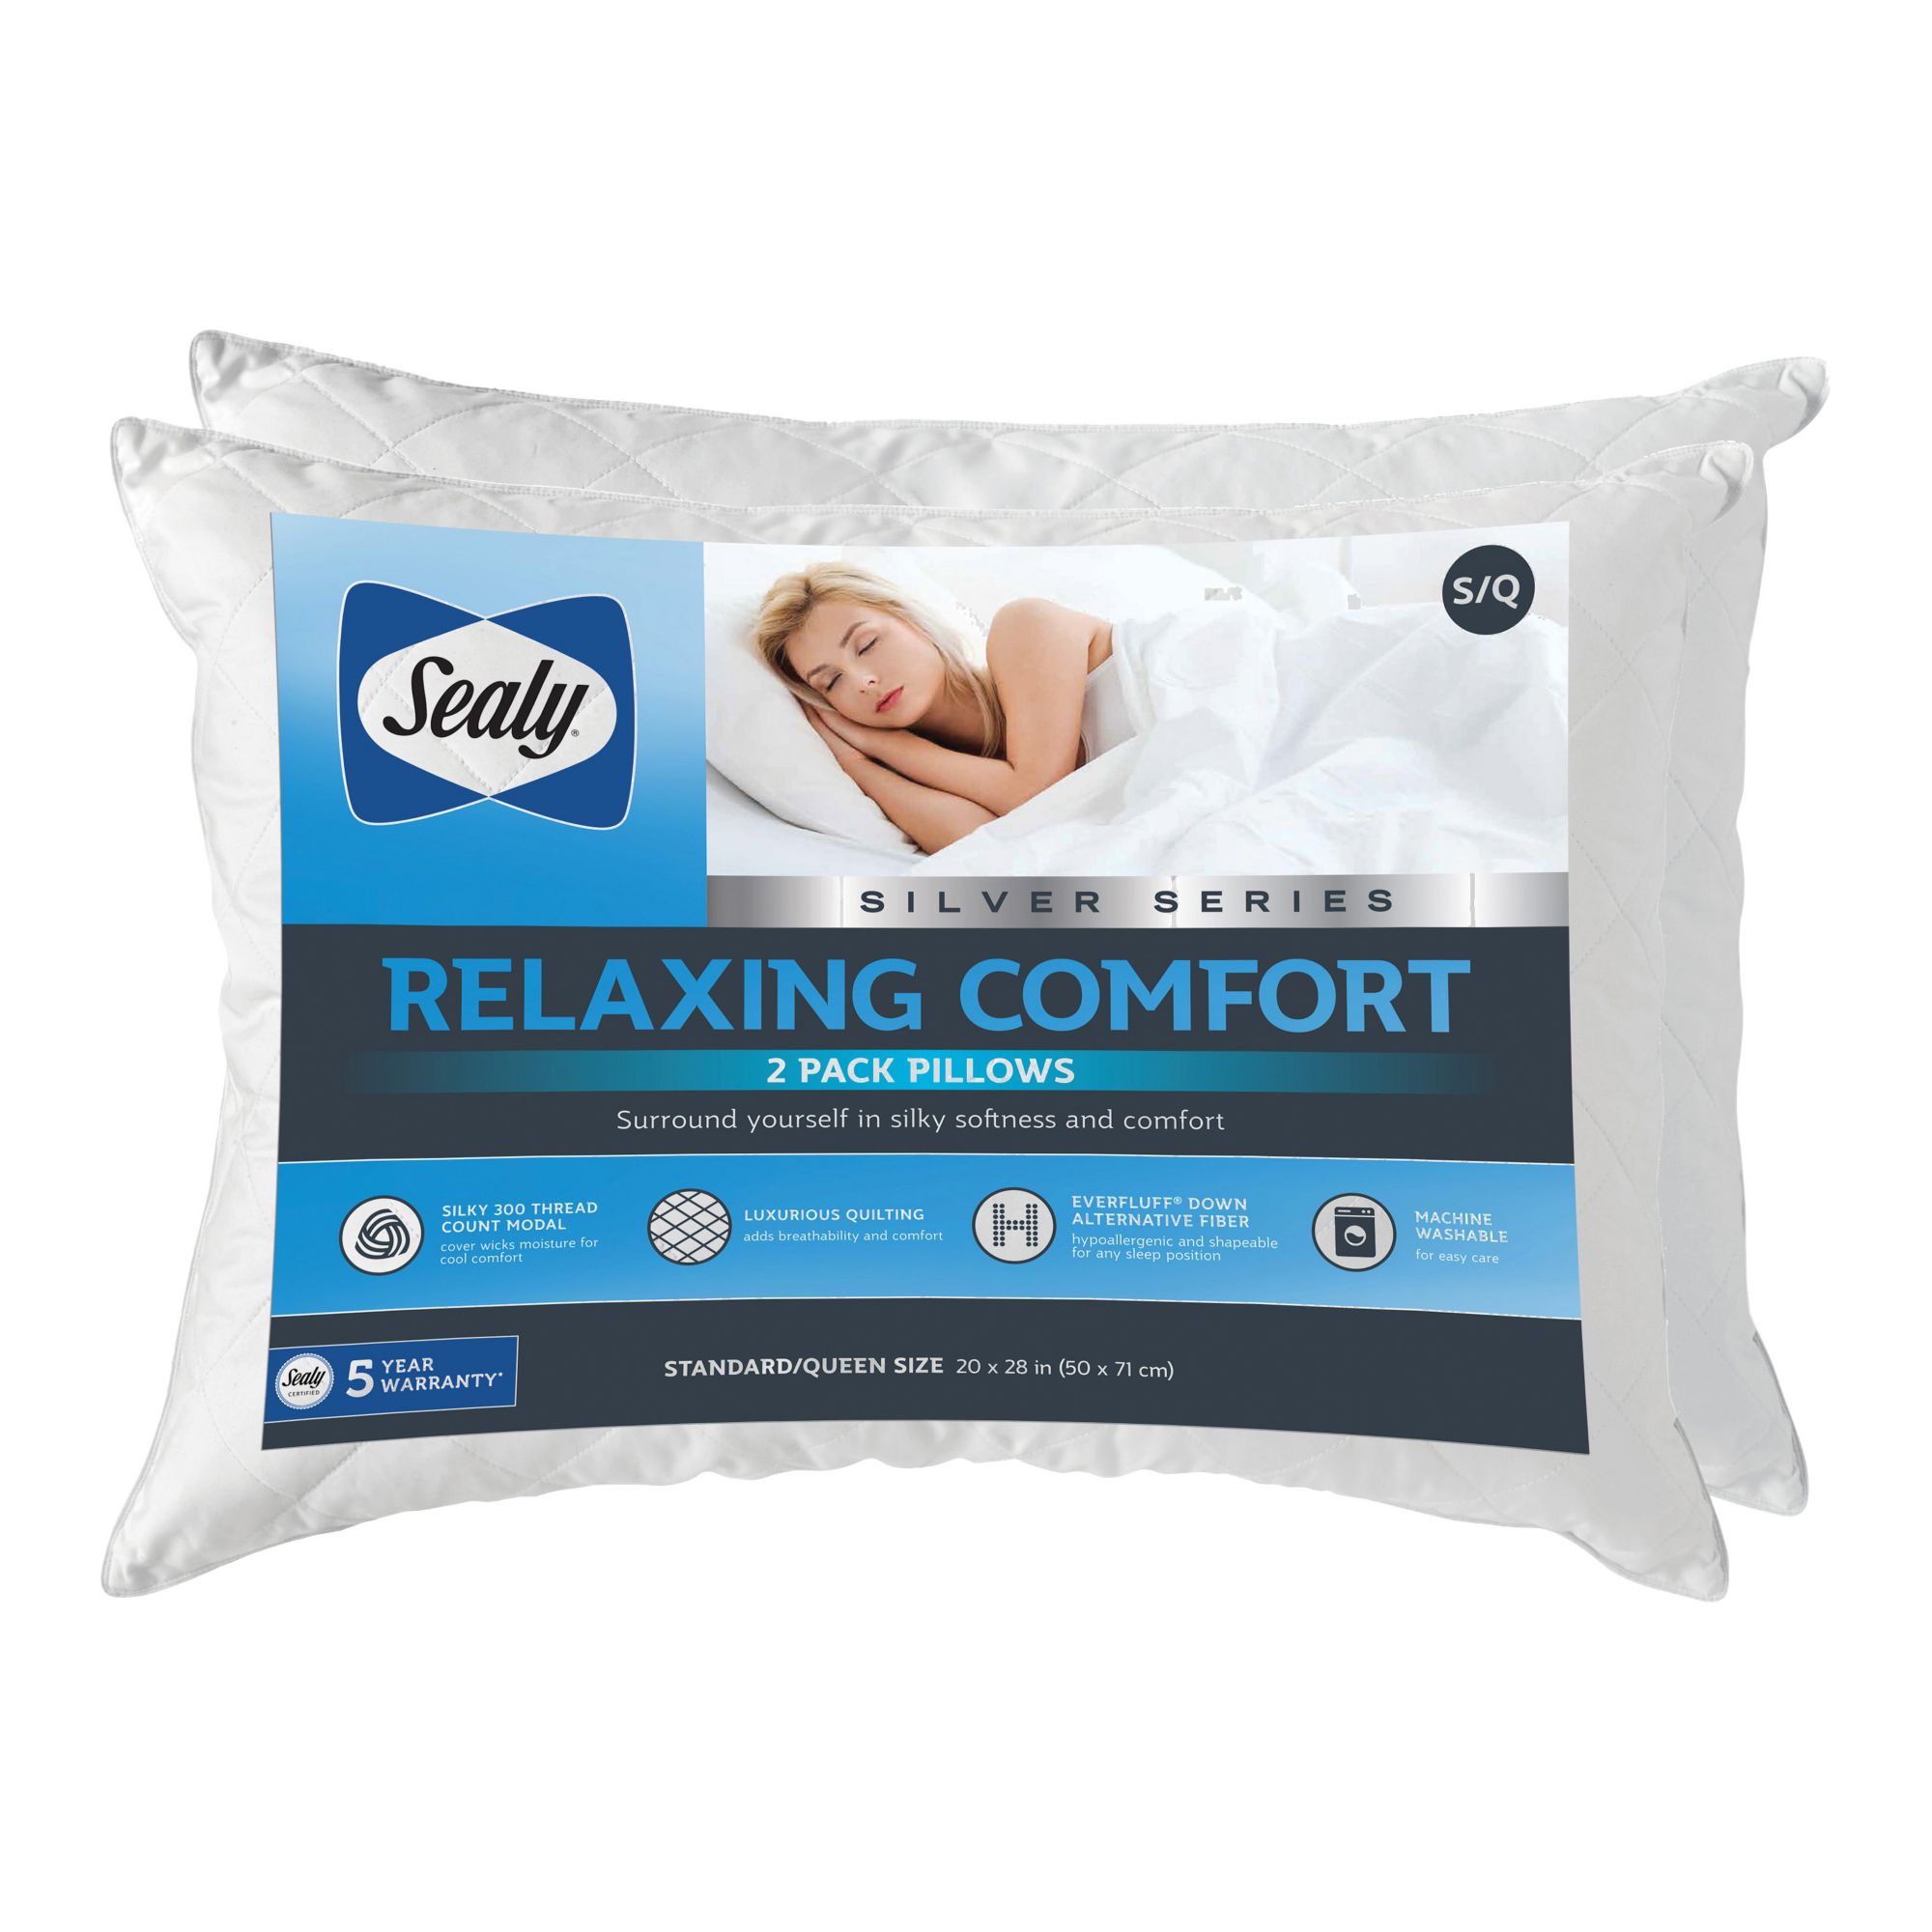 Sealy Silver Series Relaxing Comfort 